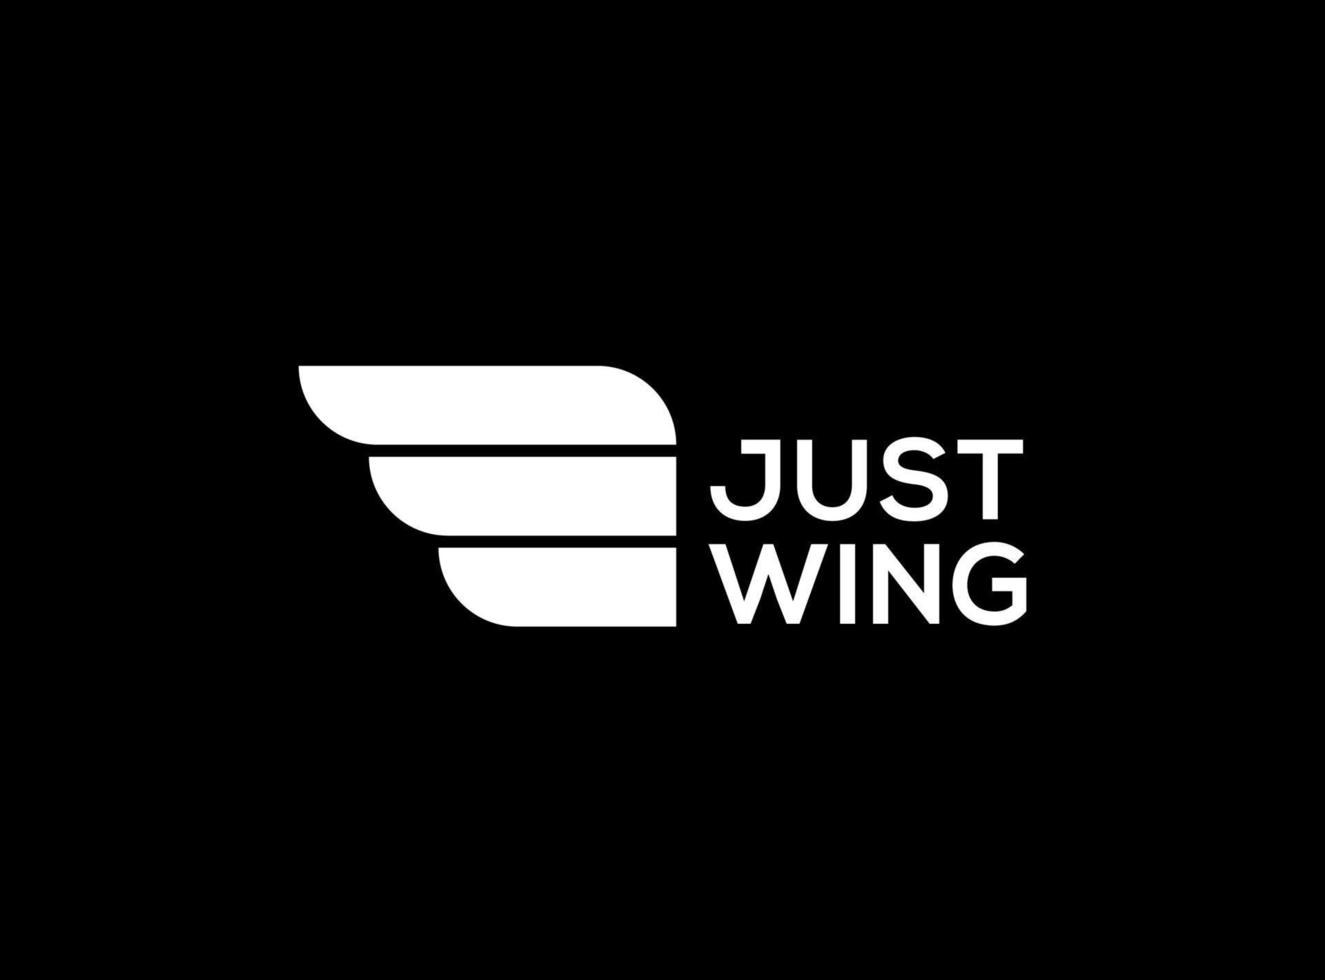 Simple wing logo design template on black background. Suitable for branding logo and etc. vector